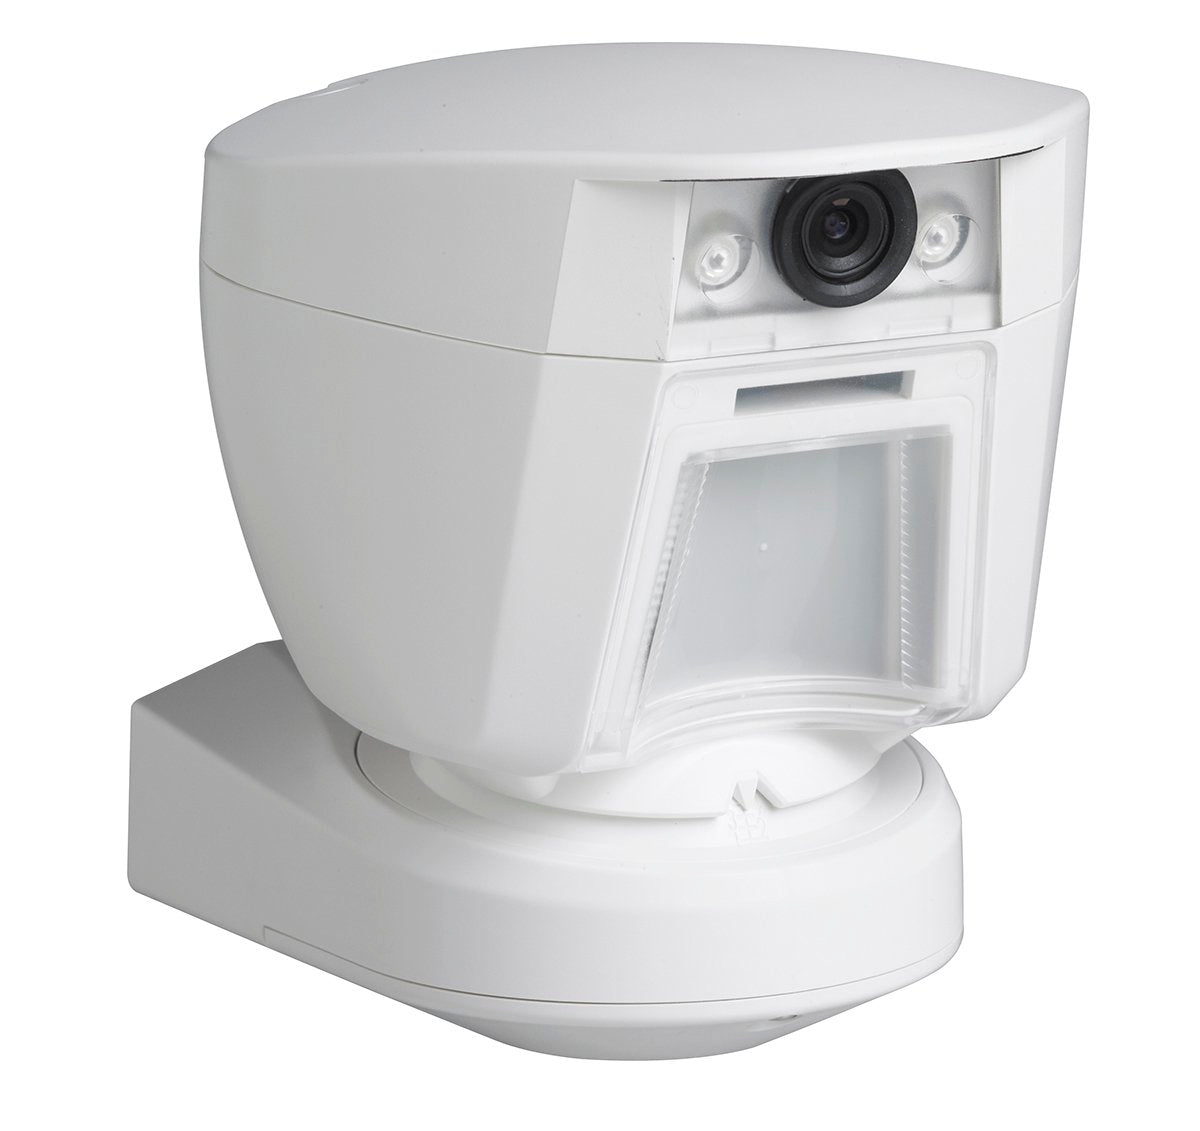 DSC* Power-G Wireless Outdoor PIR Motion Detector with Integrated Camera and PET Immunity (up to 18KGS), Range 12x12M @2.4M Height (requires: Cellular or Ethernet Communicator)